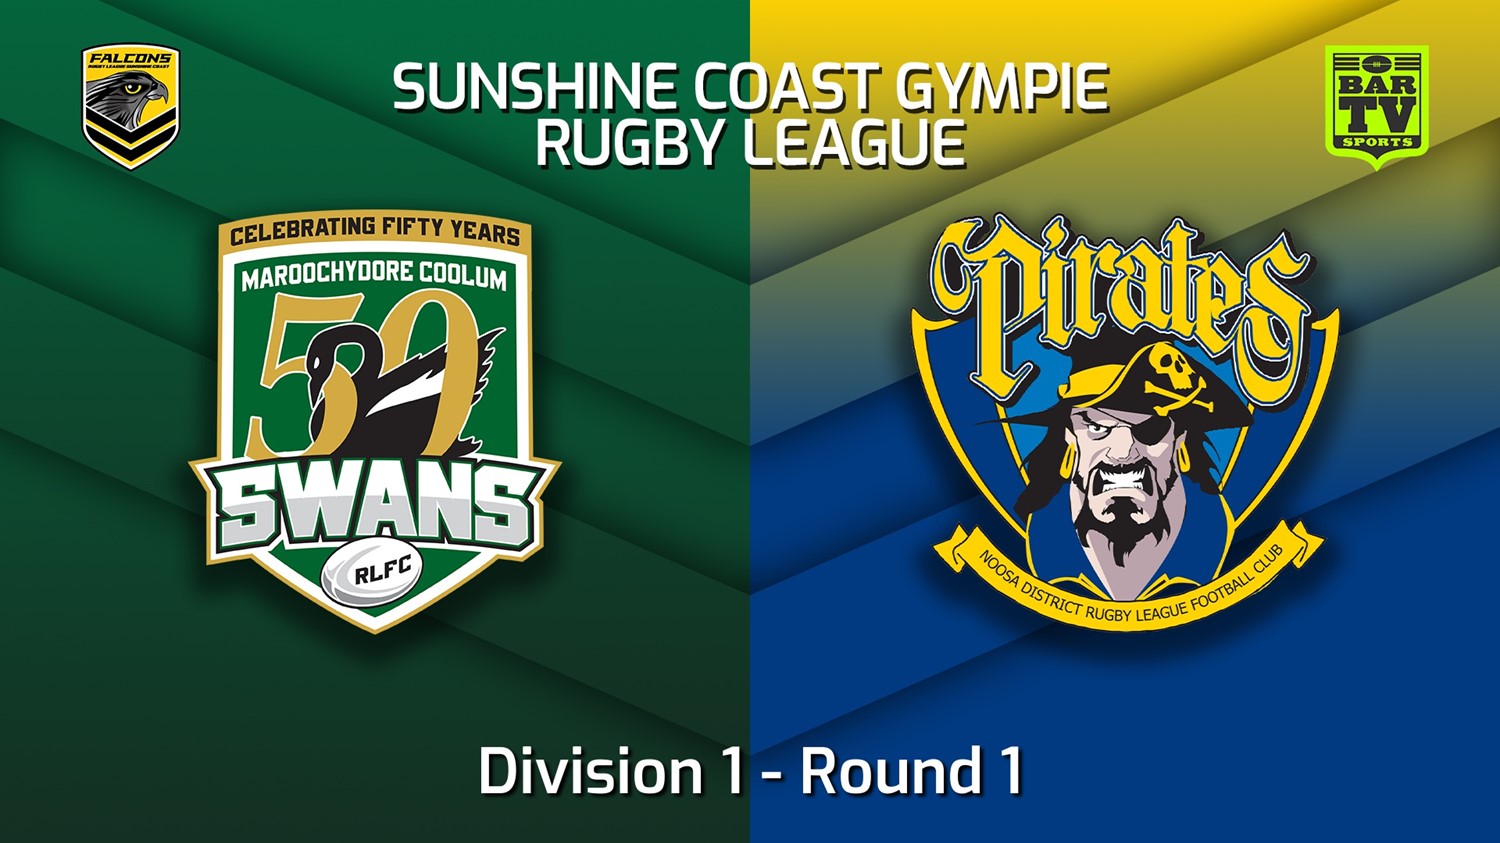 220403-2022 Sunshine Coast Gympie Rugby League Round 1 - Division 1 - Maroochydore Swans v Noosa Pirates Minigame Slate Image